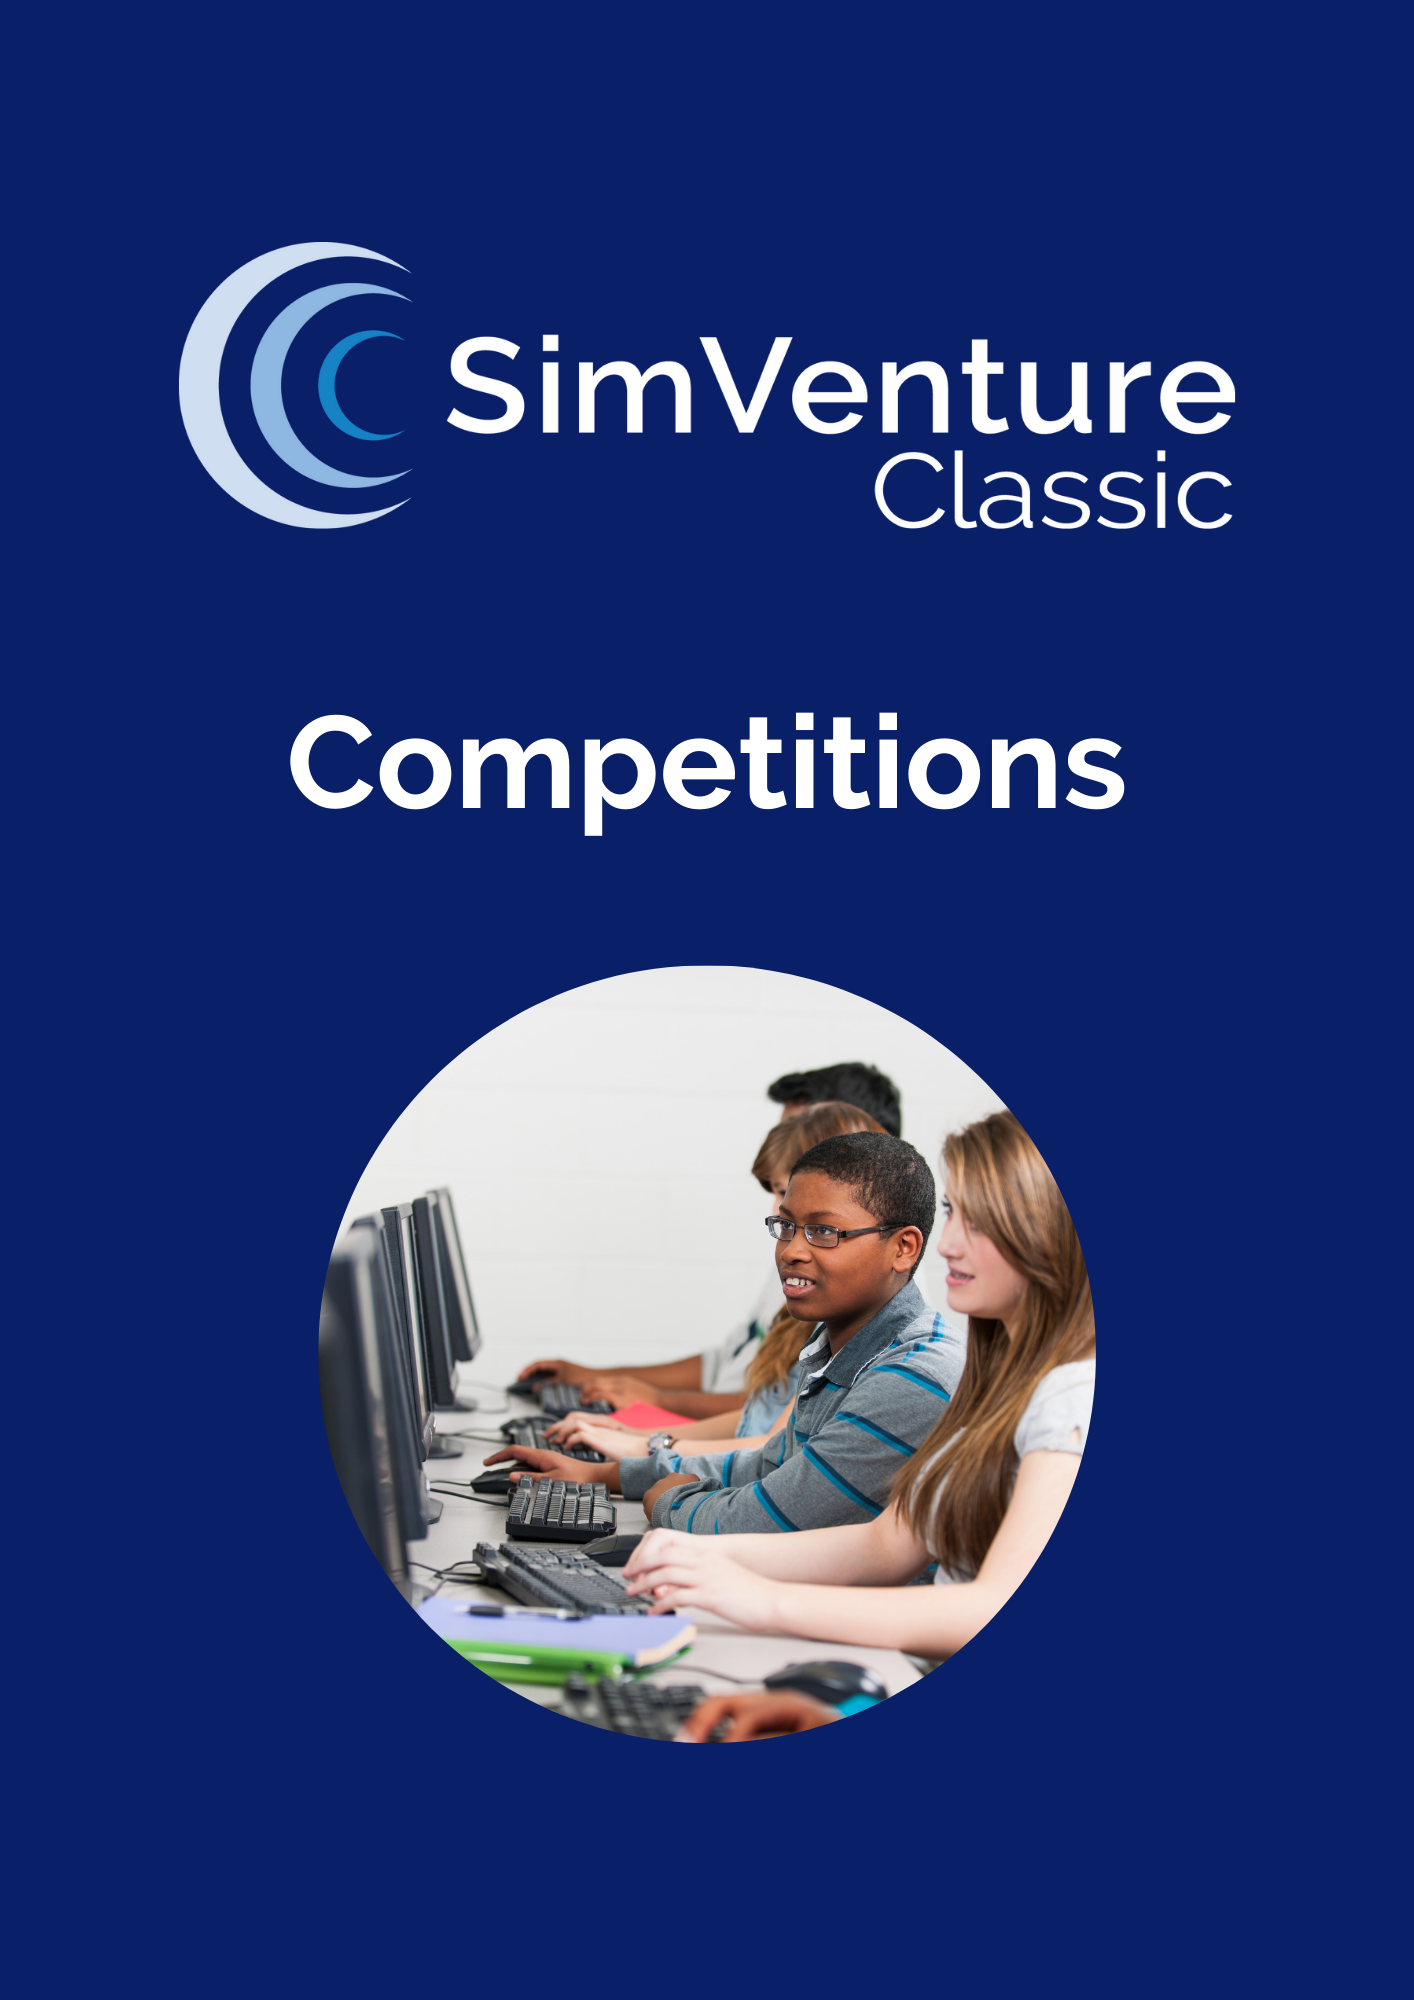 How to run competitions using SimVenture Classic